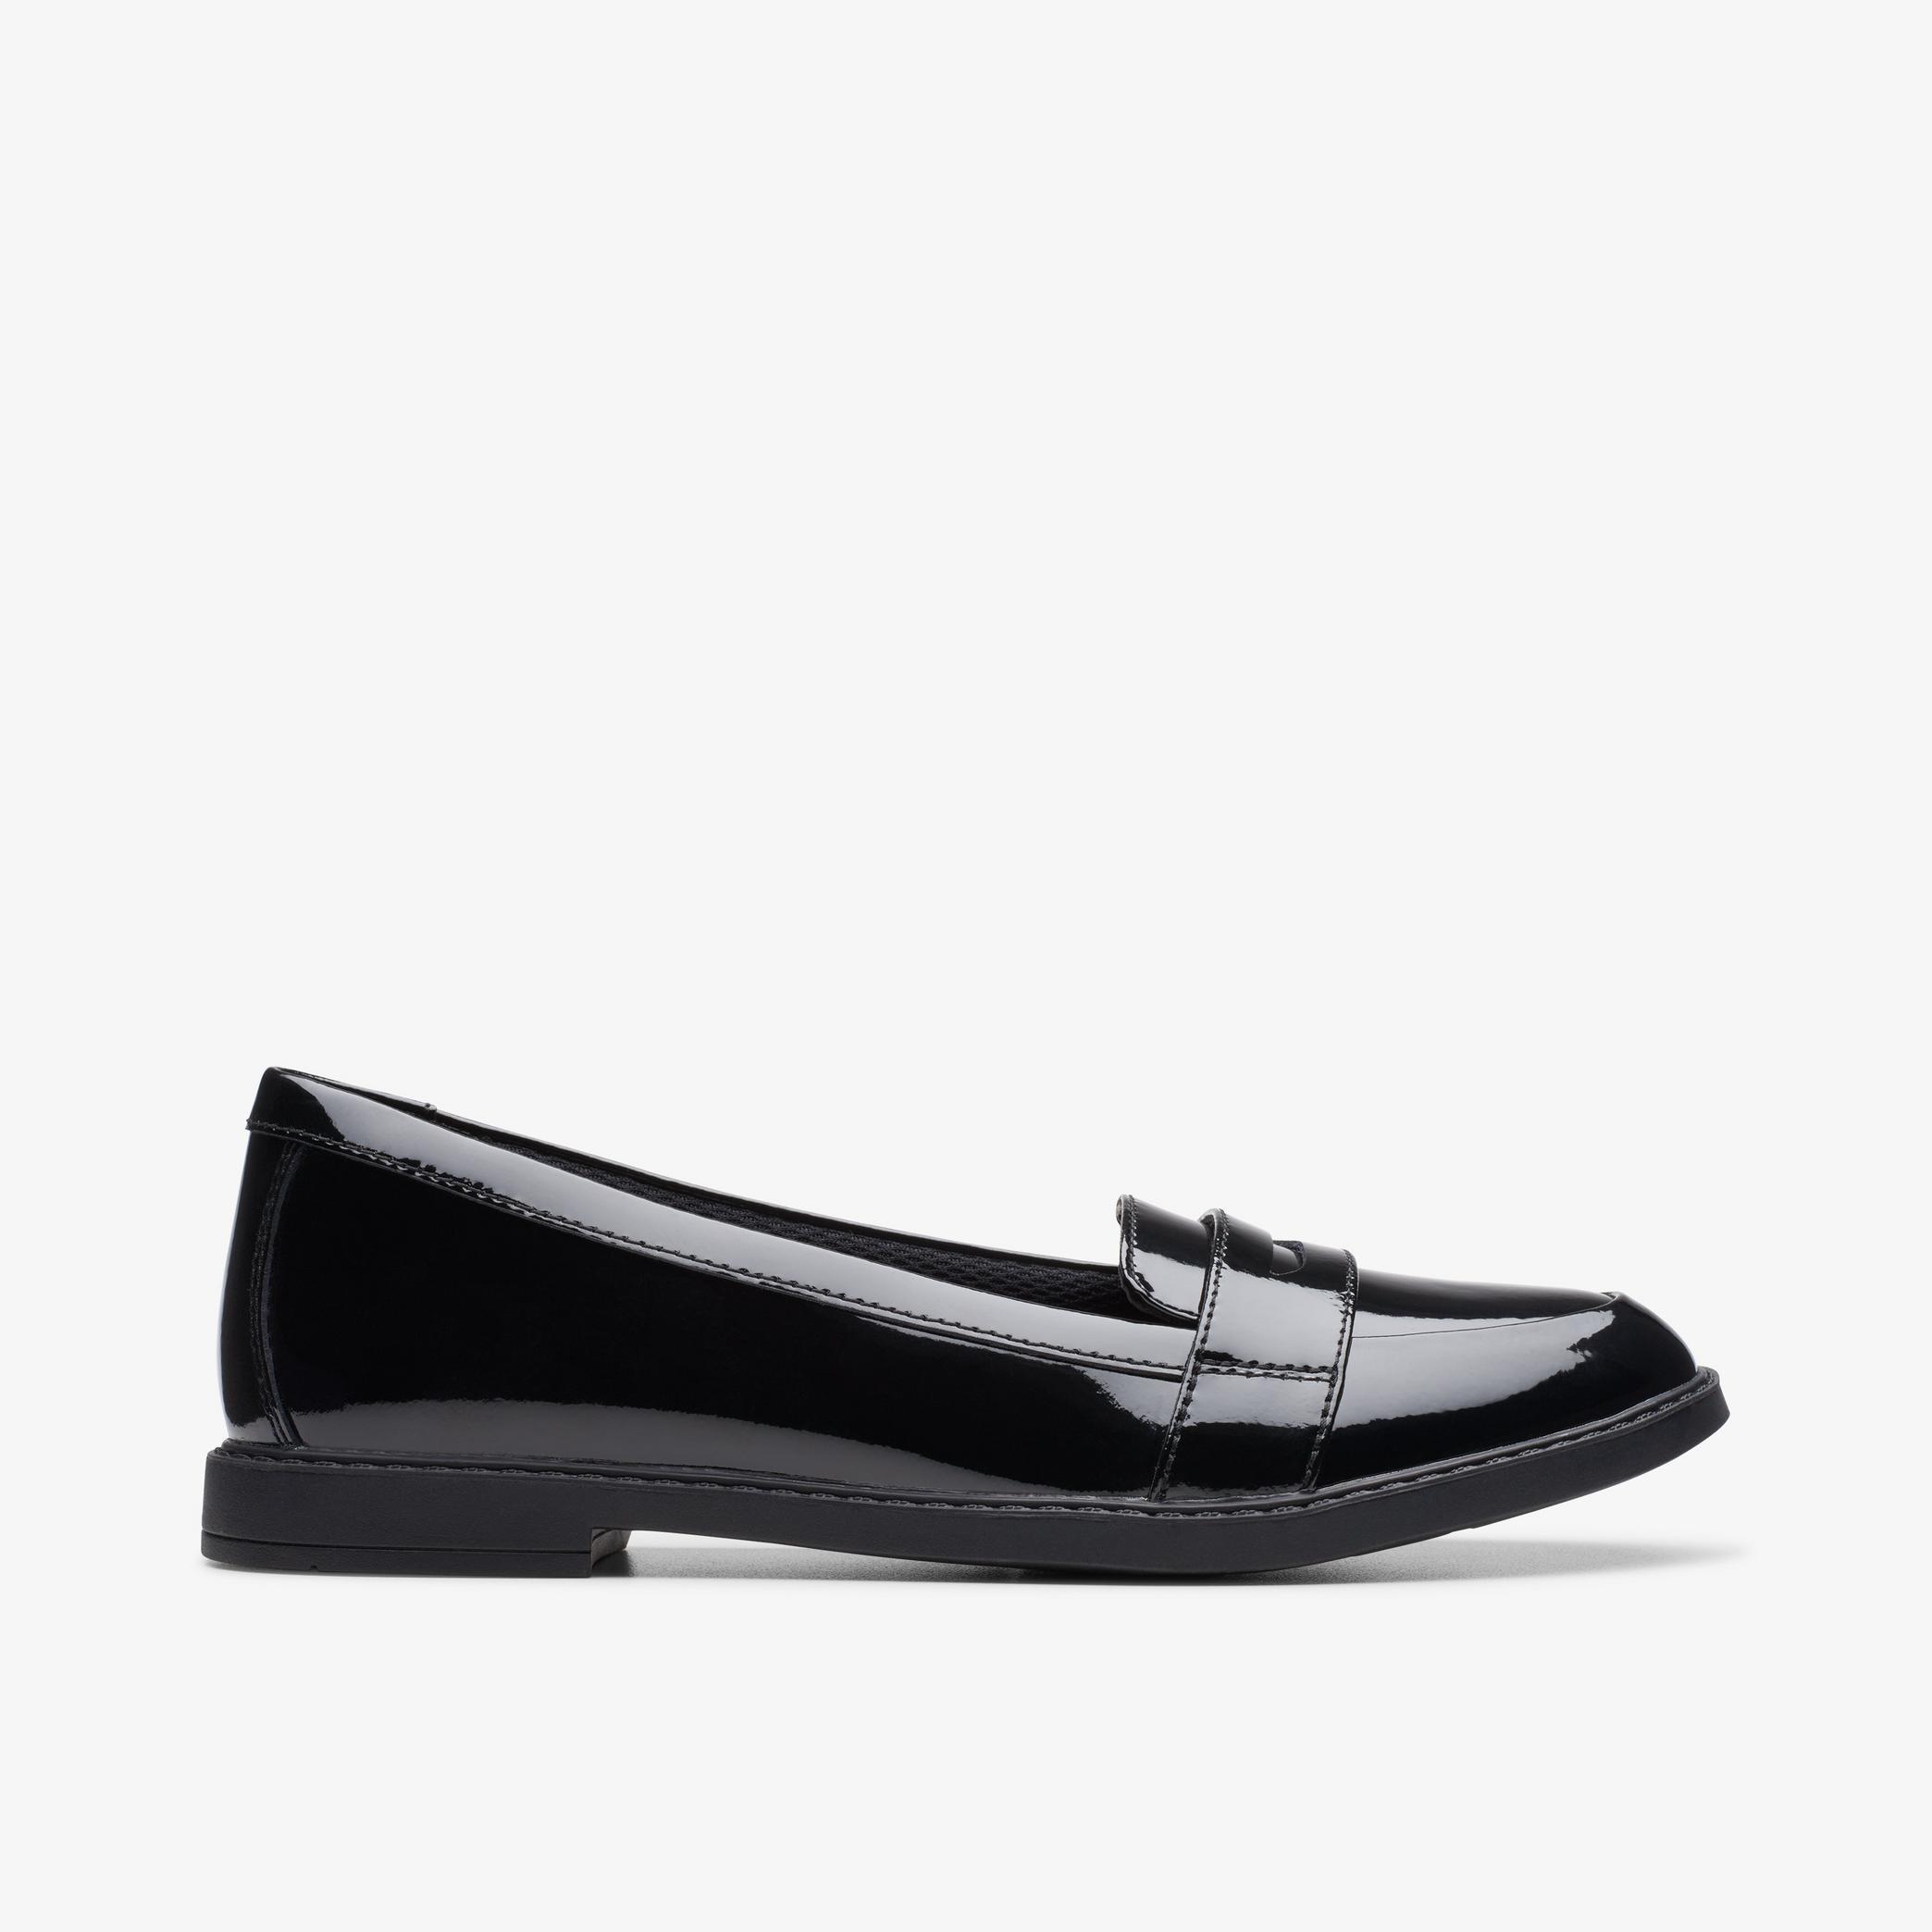 GIRLS Scala Loafer Youth Black Patent Loafers | Clarks UK